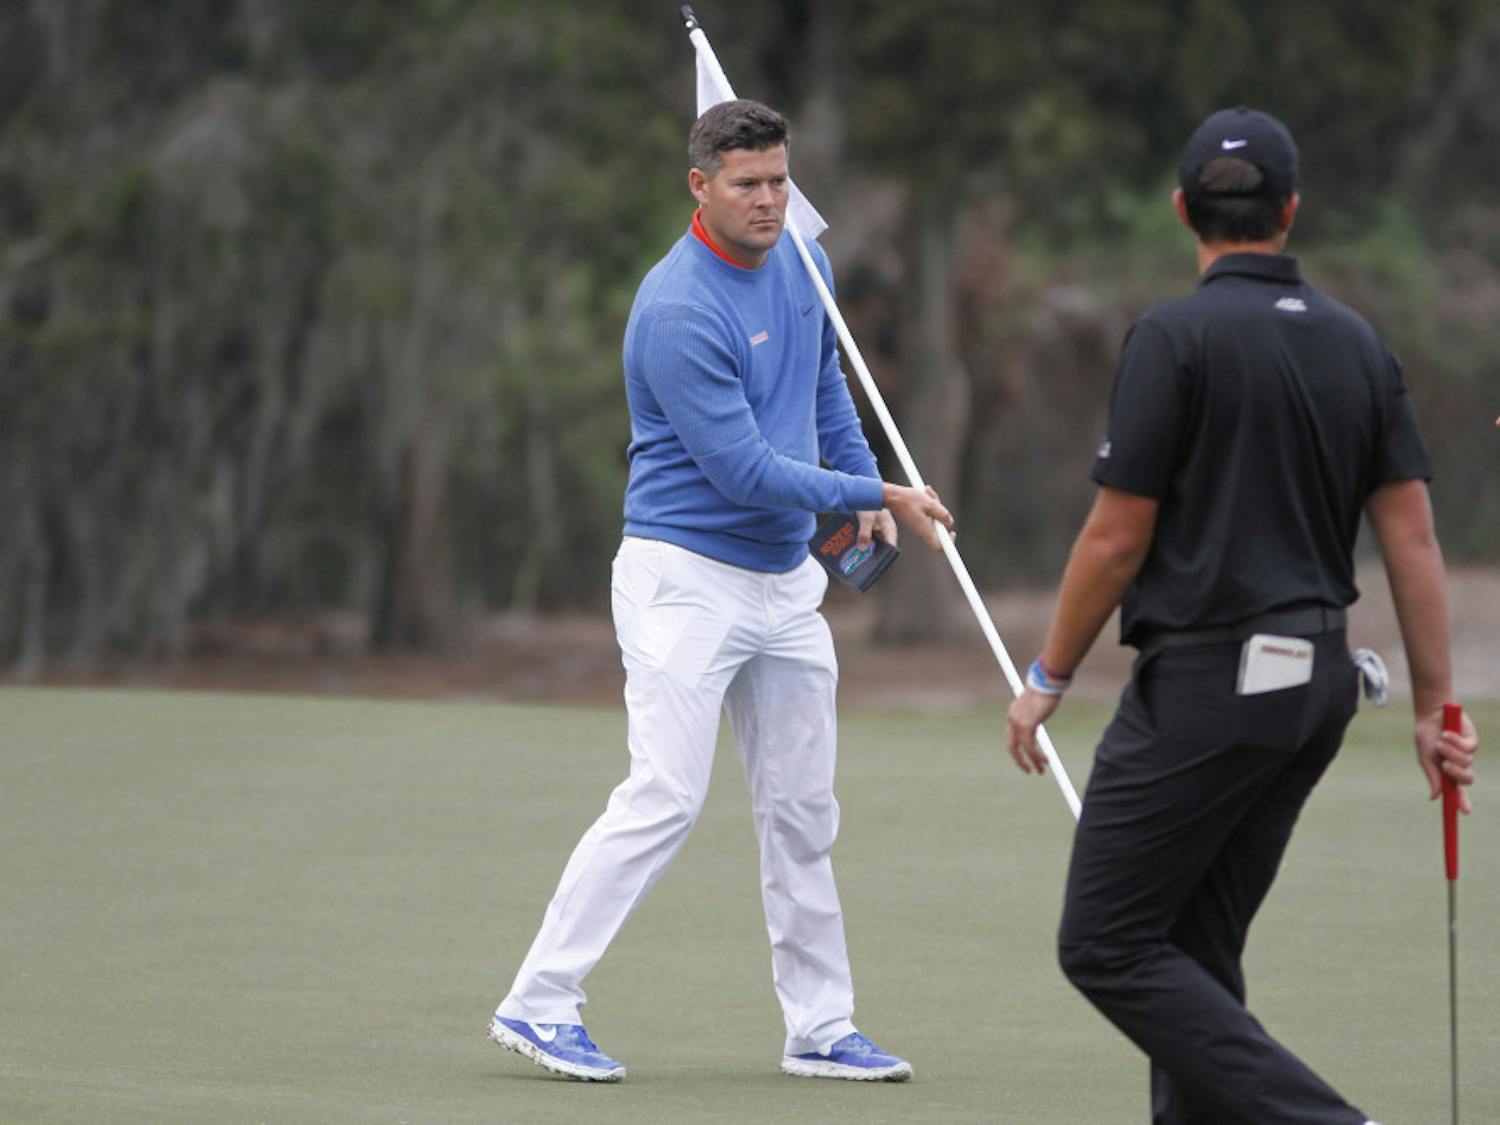 Florida men’s golf coach J.C. Deacon will make his PGA Tour debut today. The 36-year-old is competing in his home country at the RBC Canadian Open.